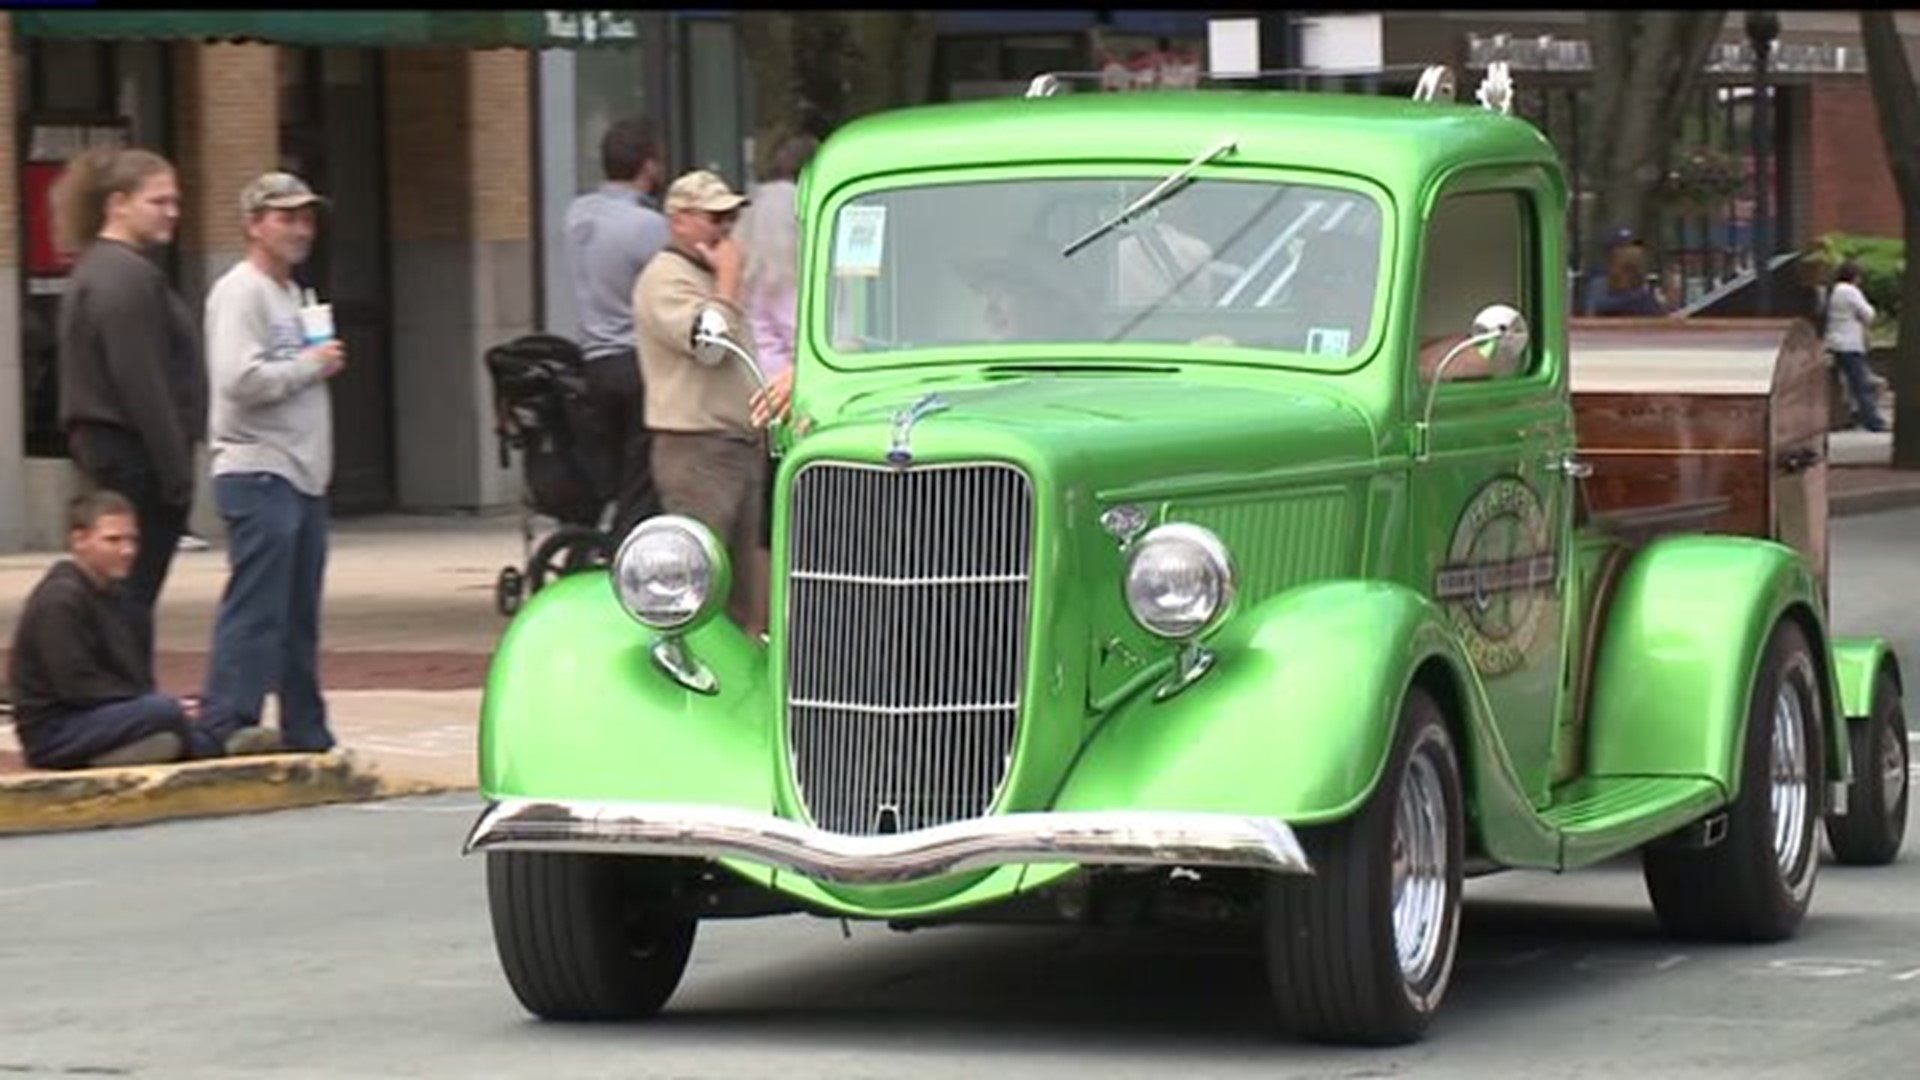 Classic cars and trucks take over streets of York for Street Rod Nationals festivities